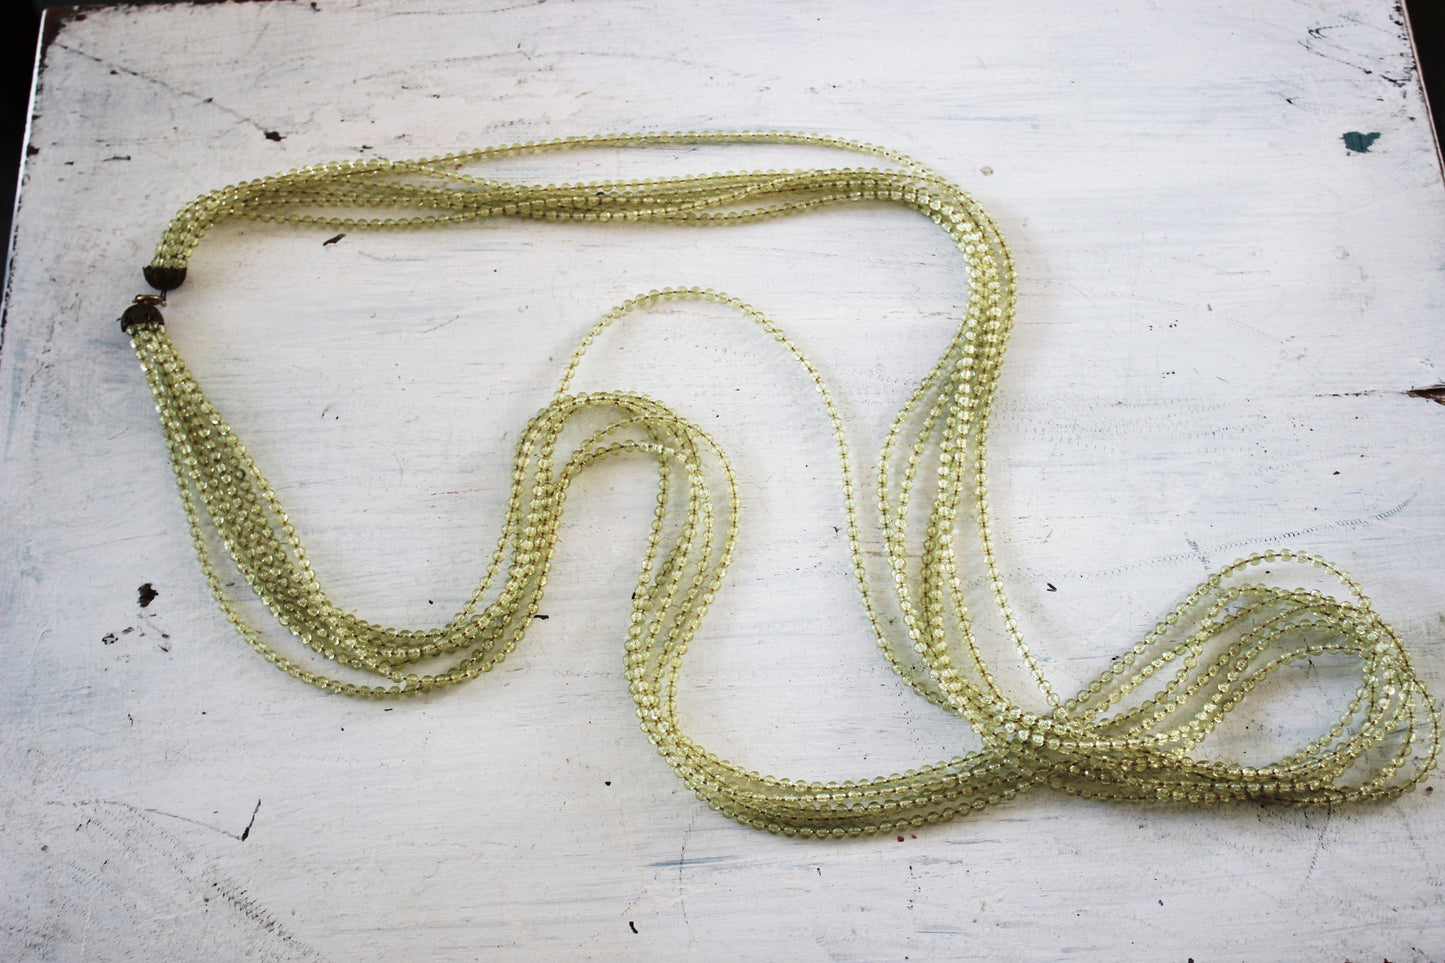 Vintage 1950s Extra Long Green Bead Necklace